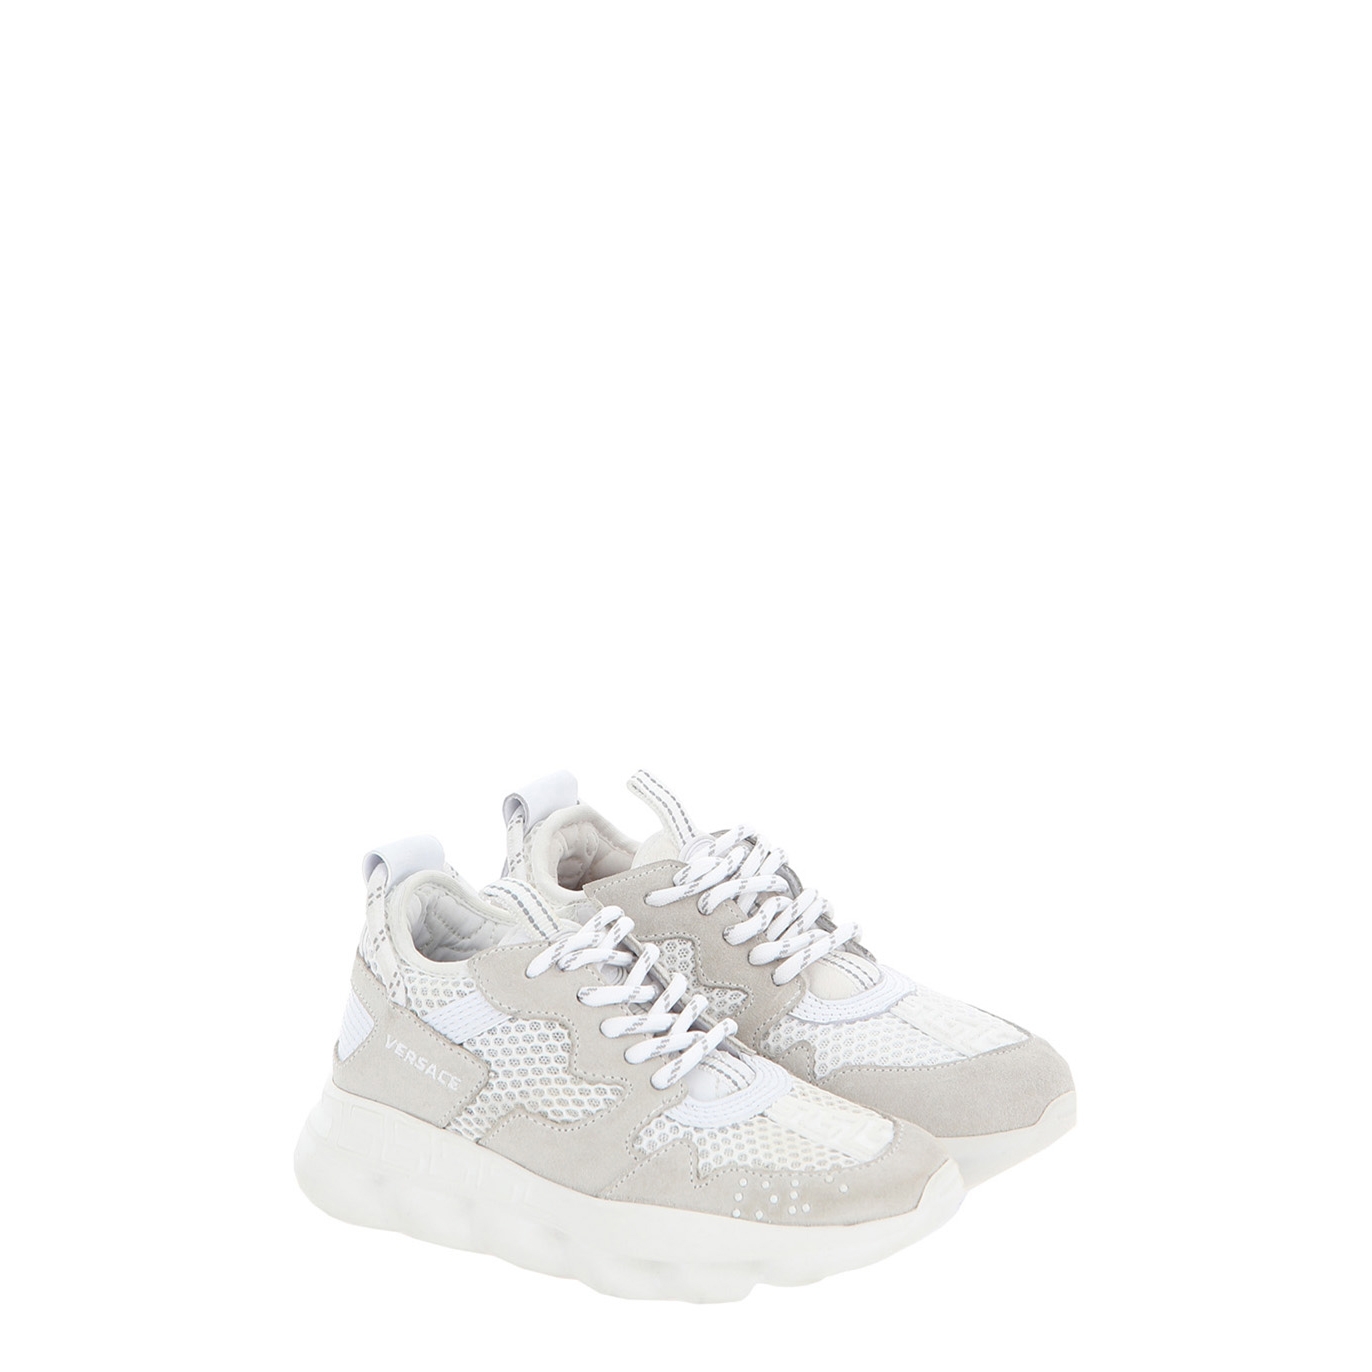 Versace Chain Reaction White Mesh Sneakers